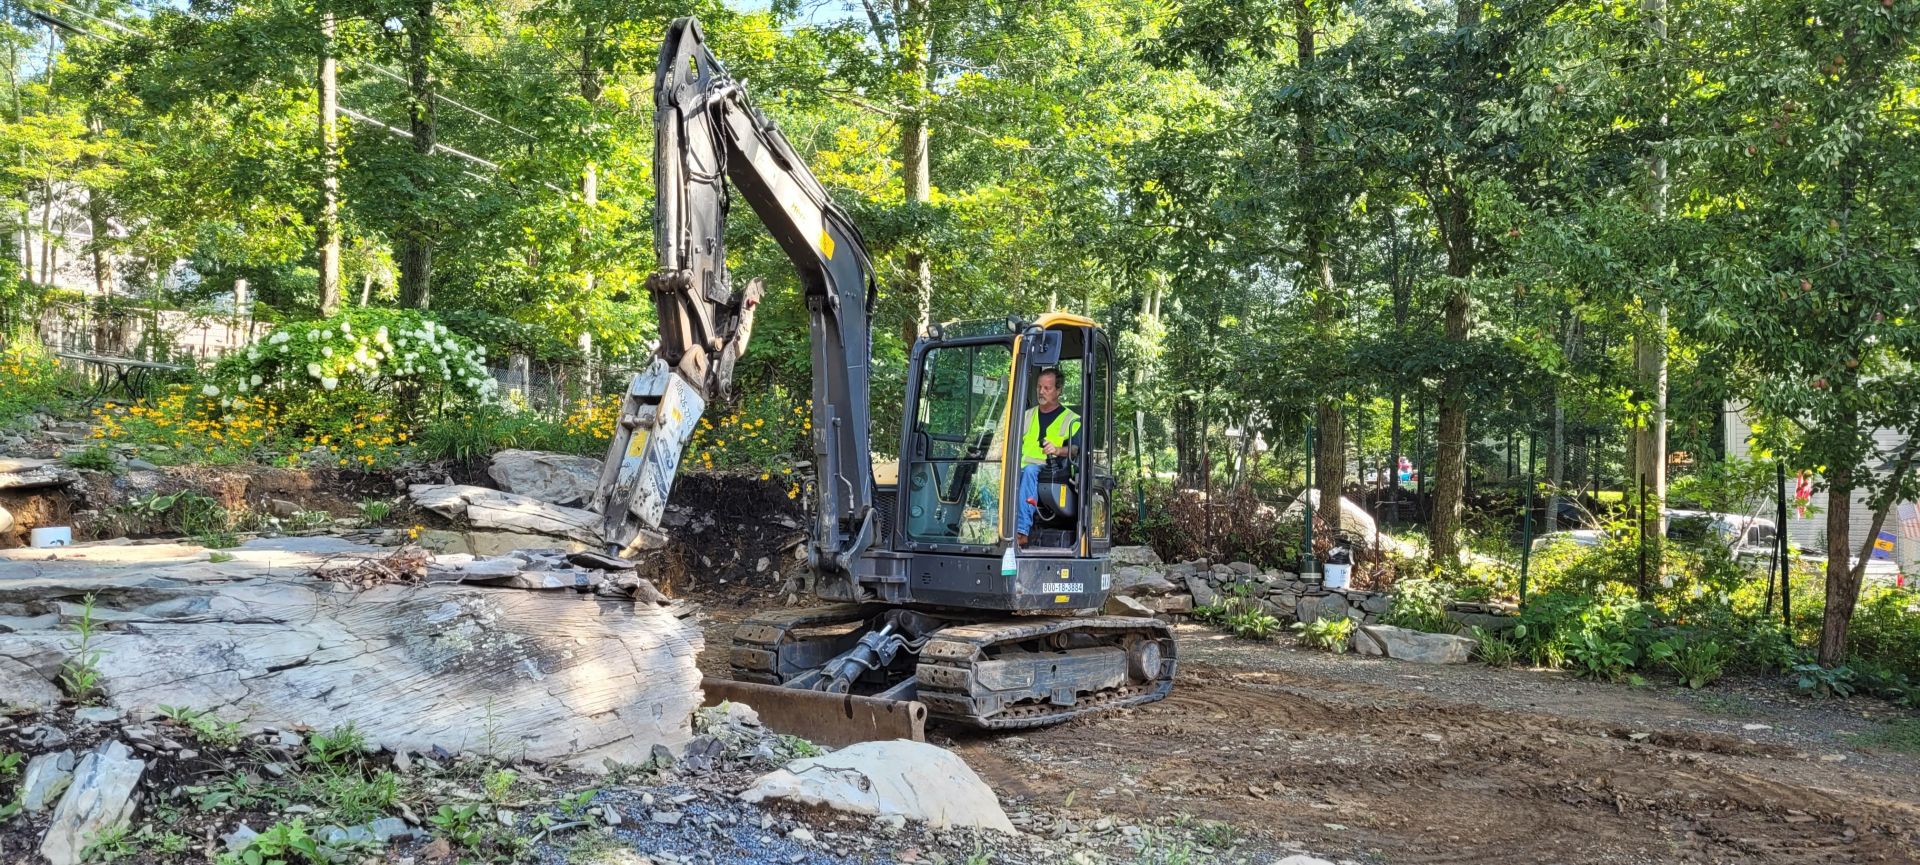 A yellow backhoe working on a personal property to level the ground for landscaping, with piles of dirt and rocks